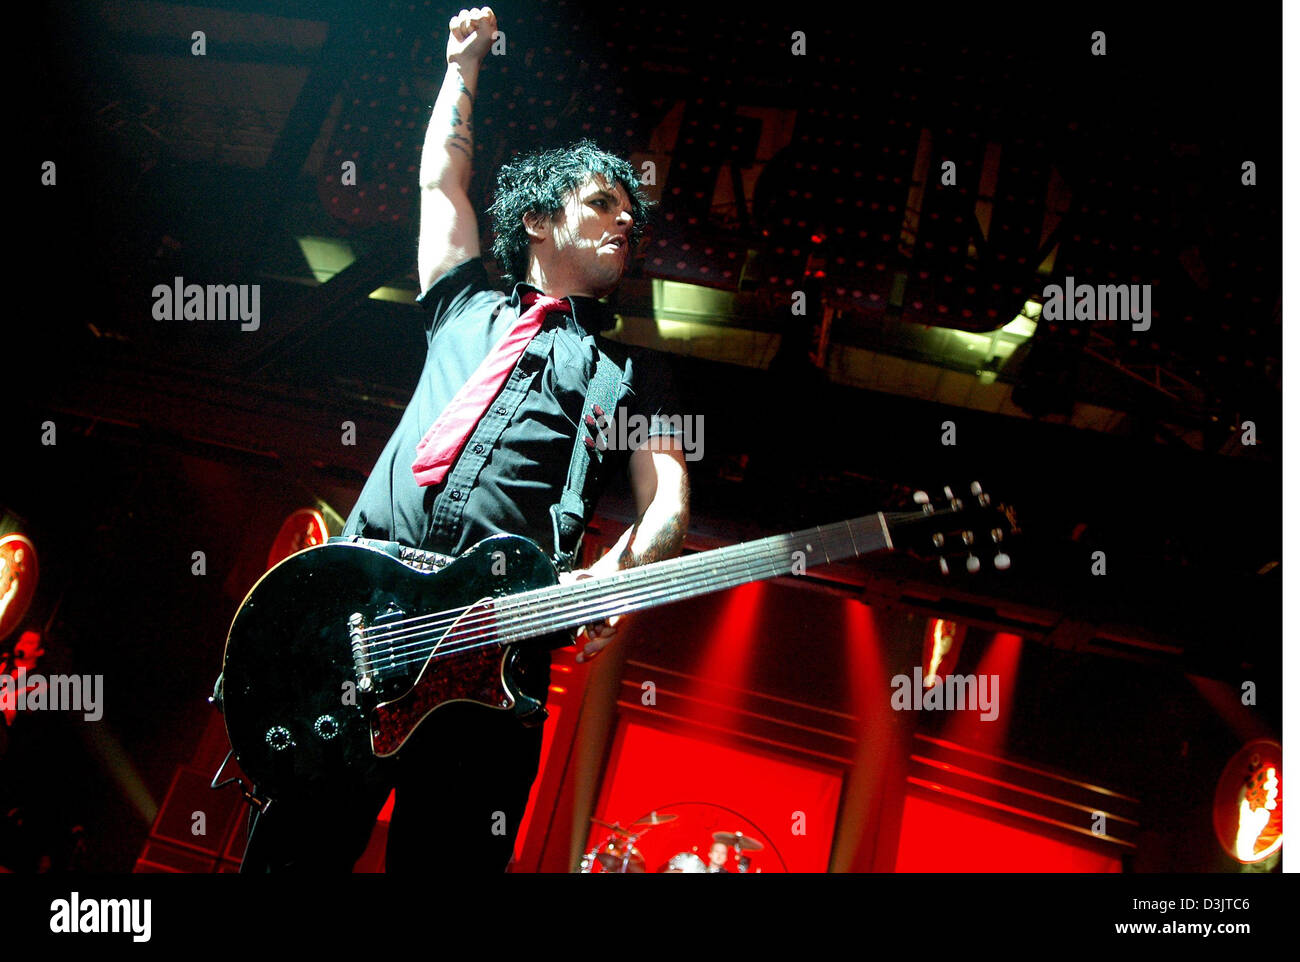 (dpa) - Billie Joe Armstrong, lead singer of US punk rock band Green Day performs during the band's concert at the Arena in Berlin, Germany, 11 January 2005. The Berlin concert kicked off Green Day's European tour. Stock Photo